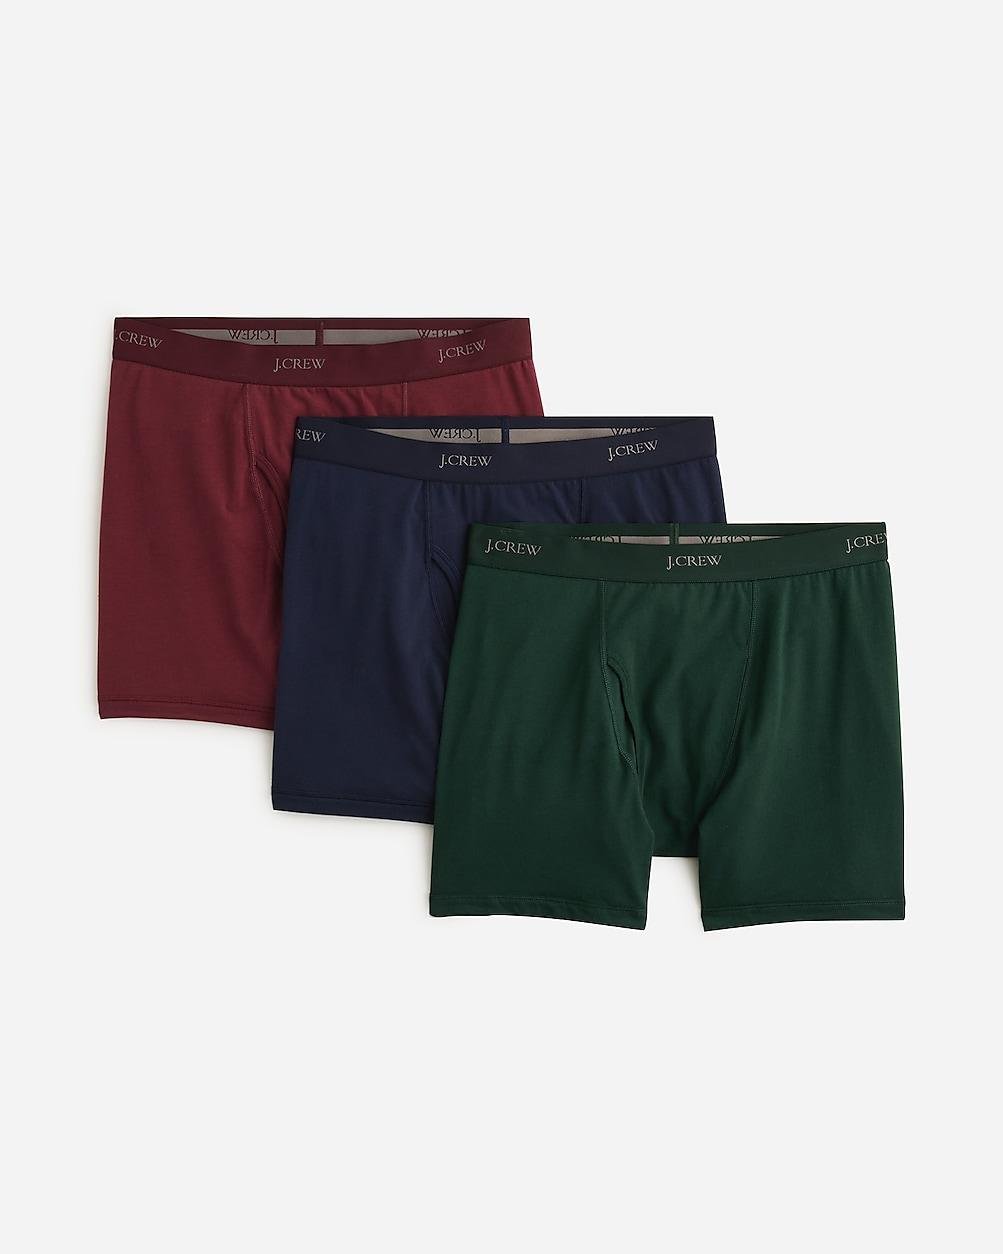 Stretch 4'' boxer briefs three-pack by J.CREW